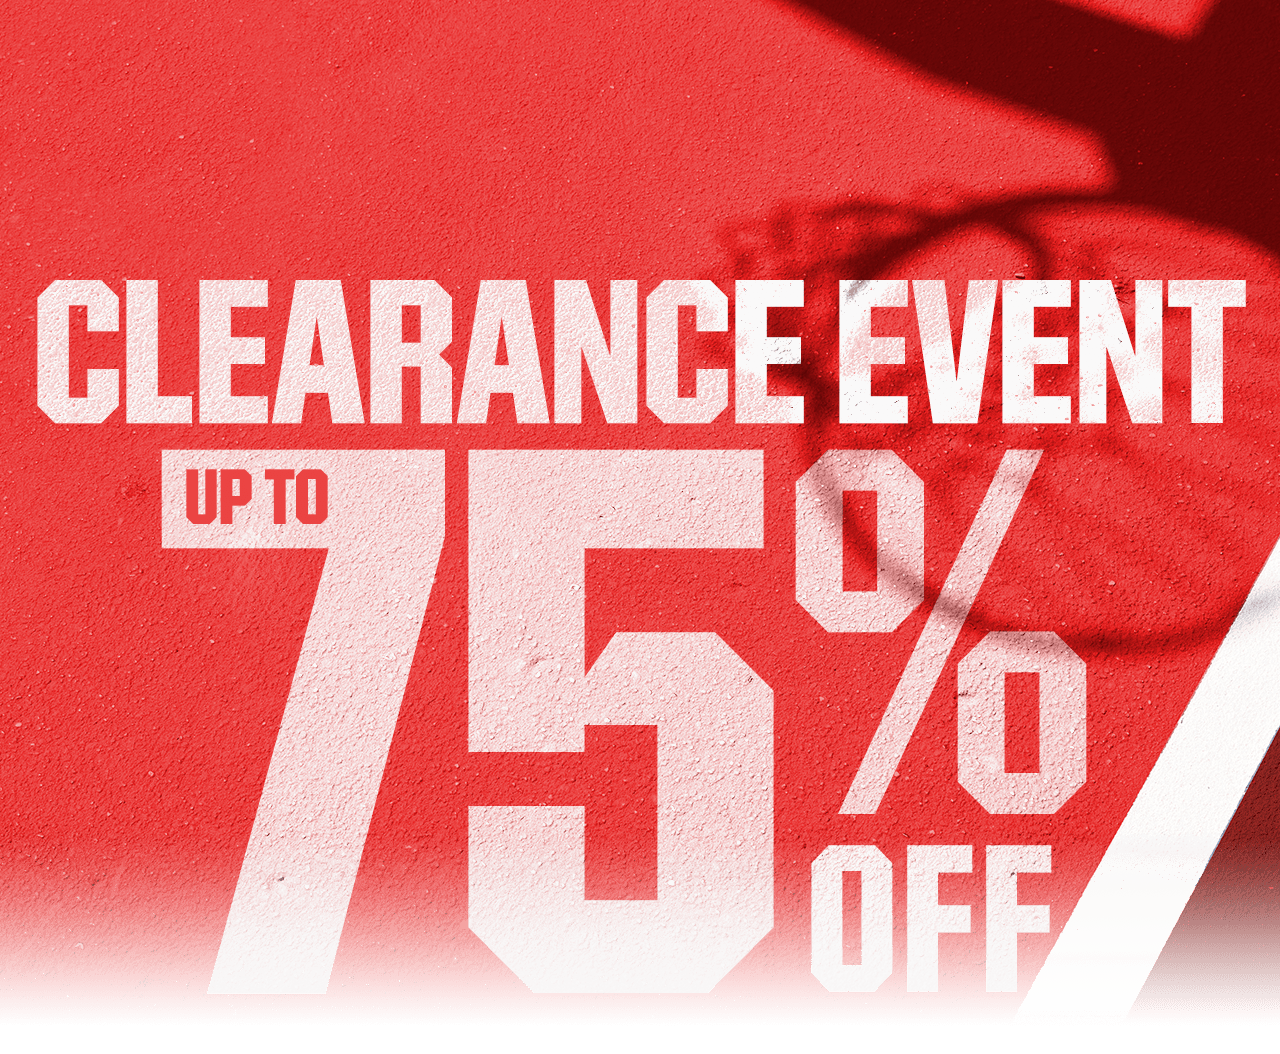 Take up to 75% off during our clearance event.